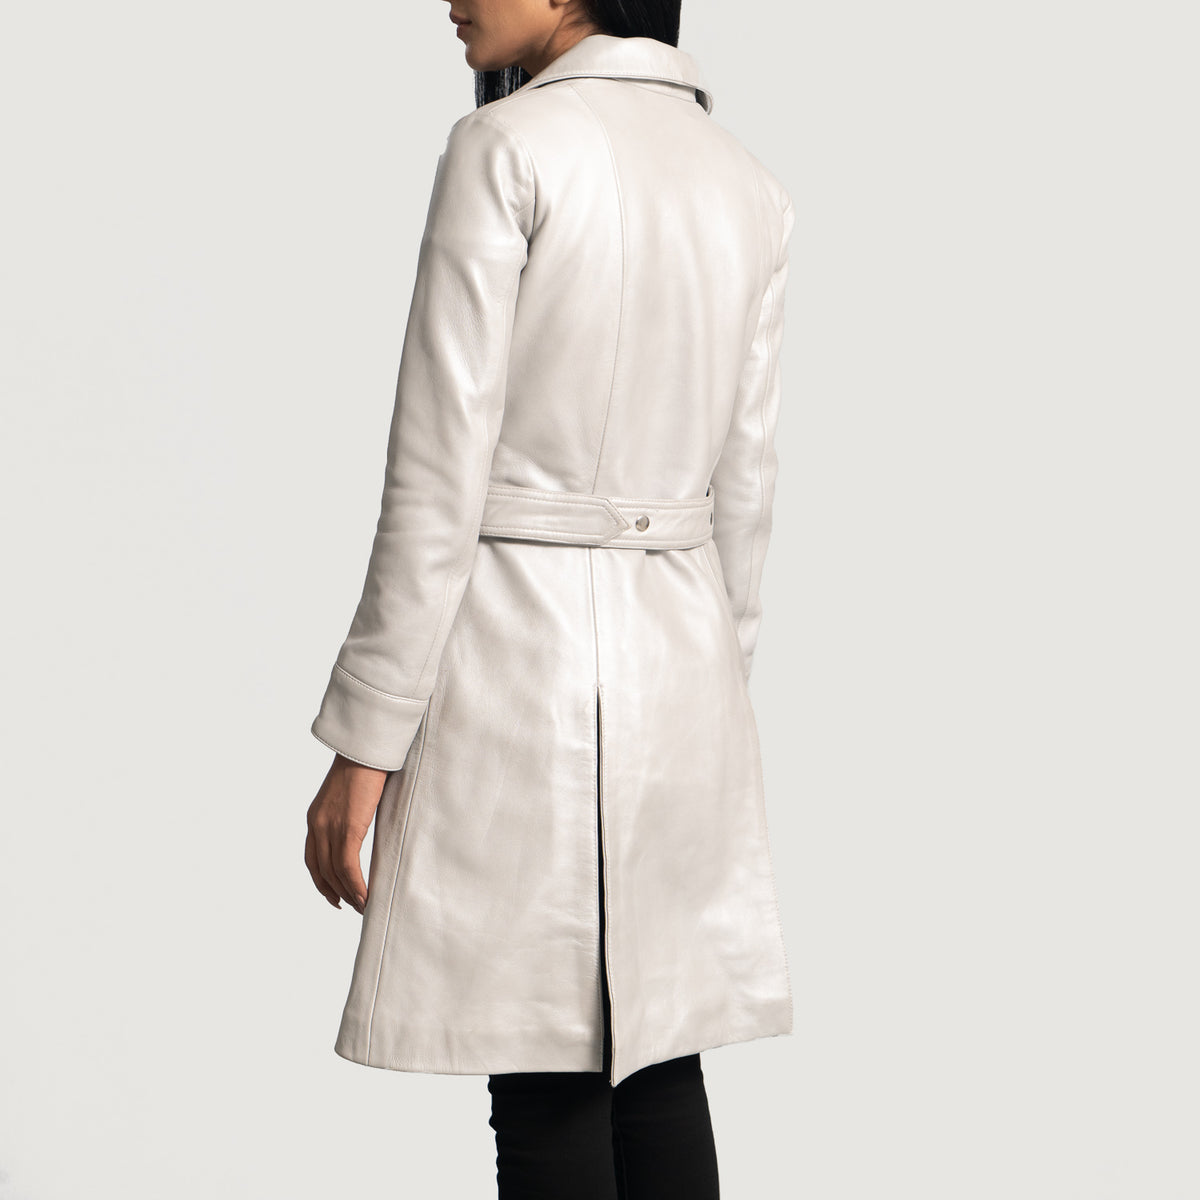 Moonlight Silver Leather Trench Coat